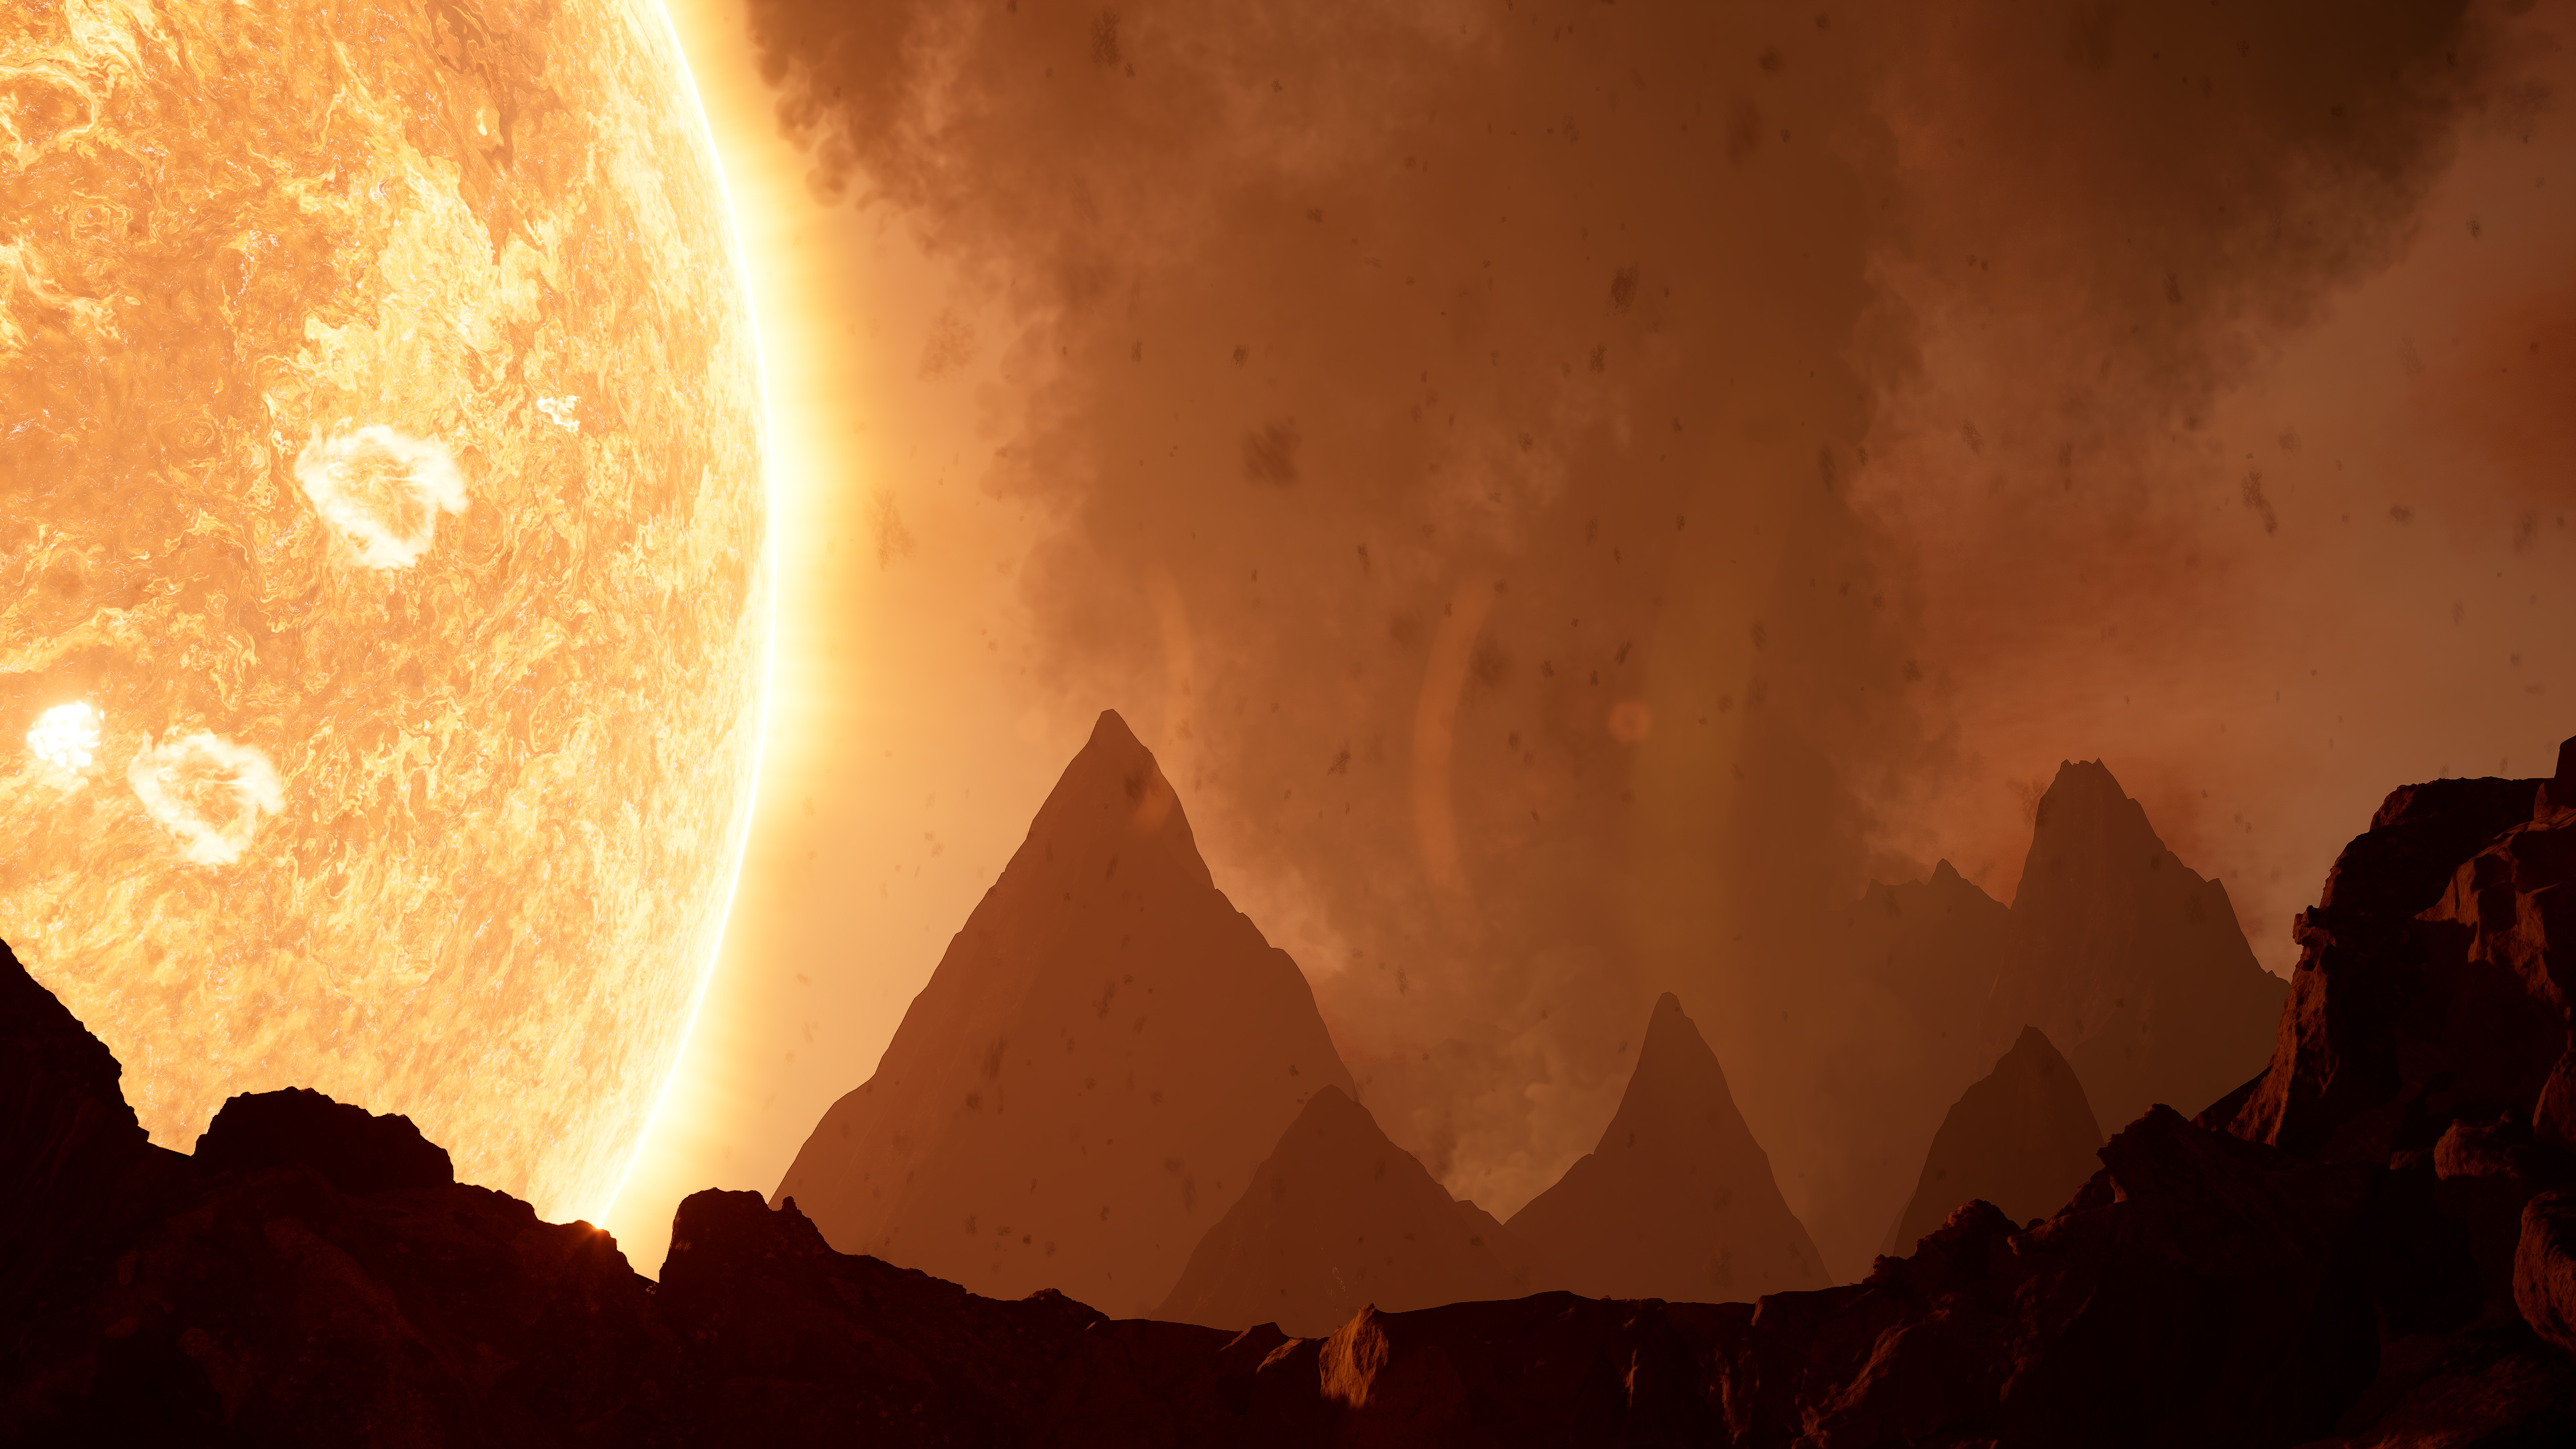 A fiery dance of elements: Witness the intense play of molten lava and towering volcanoes under the watchful gaze of a massive, eruptive orange star.